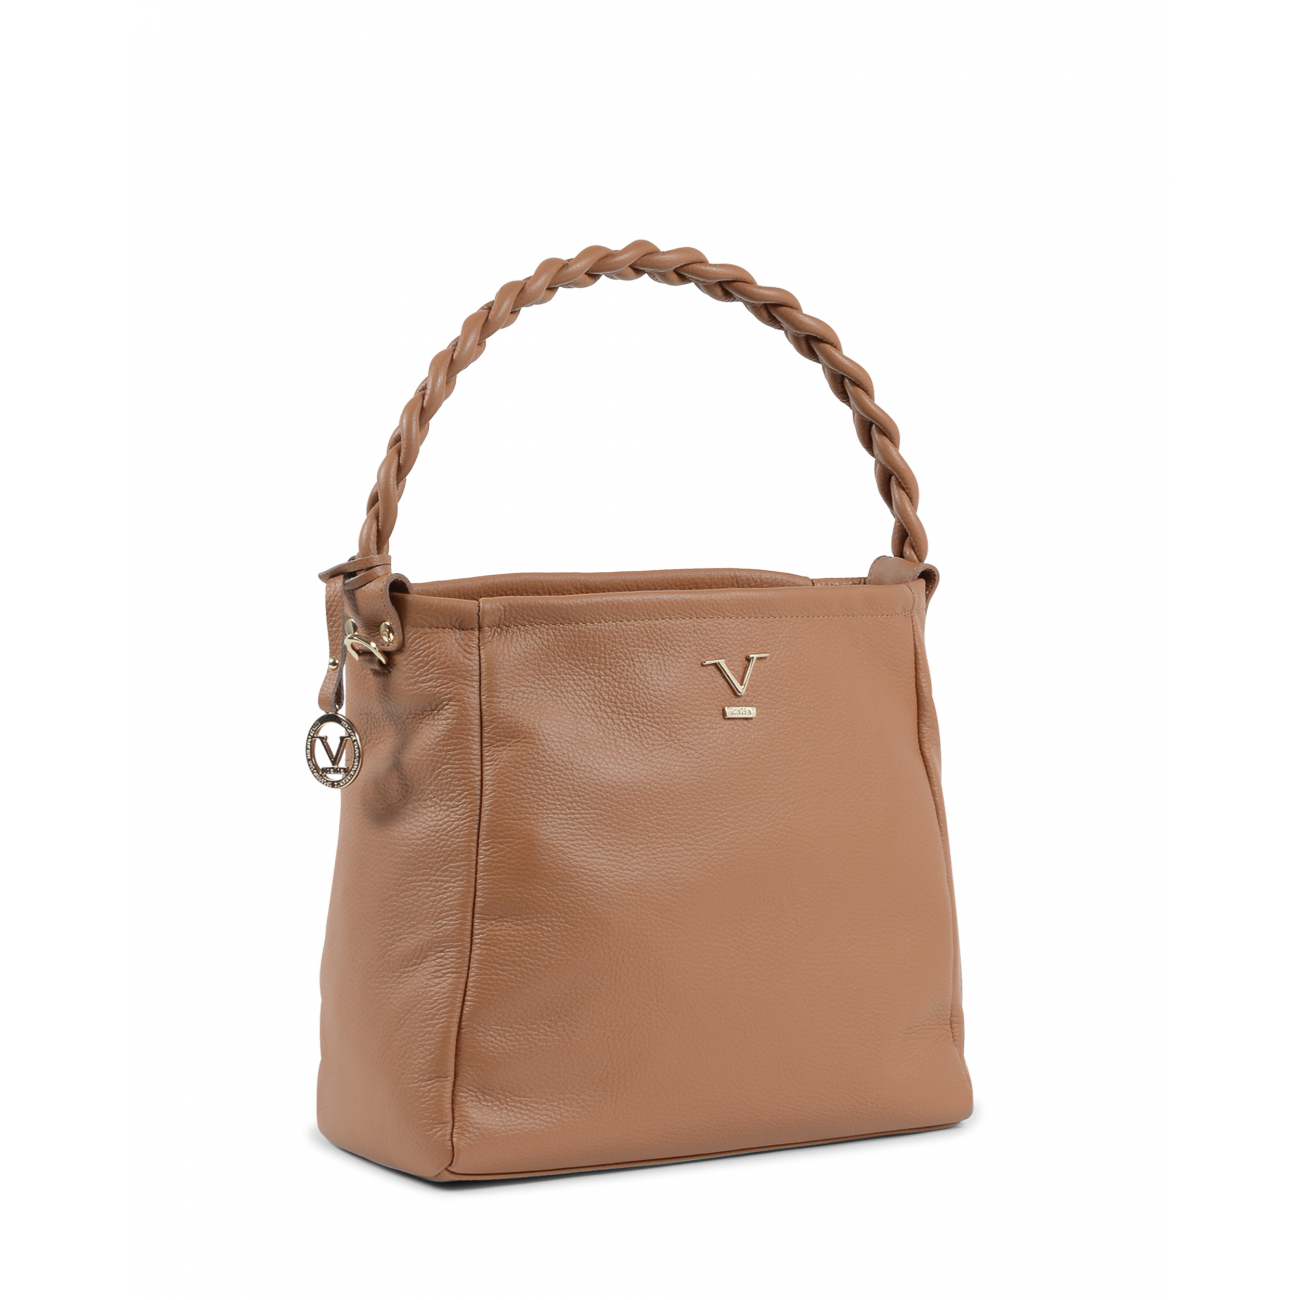 By: 19V69 Italia- Details: VE1633 DOLLARO CUOIO- Color: Tan - Composition: 100% LEATHER - Measures: 33x30x16 cm - Made: ITALY - Season: All Seasons